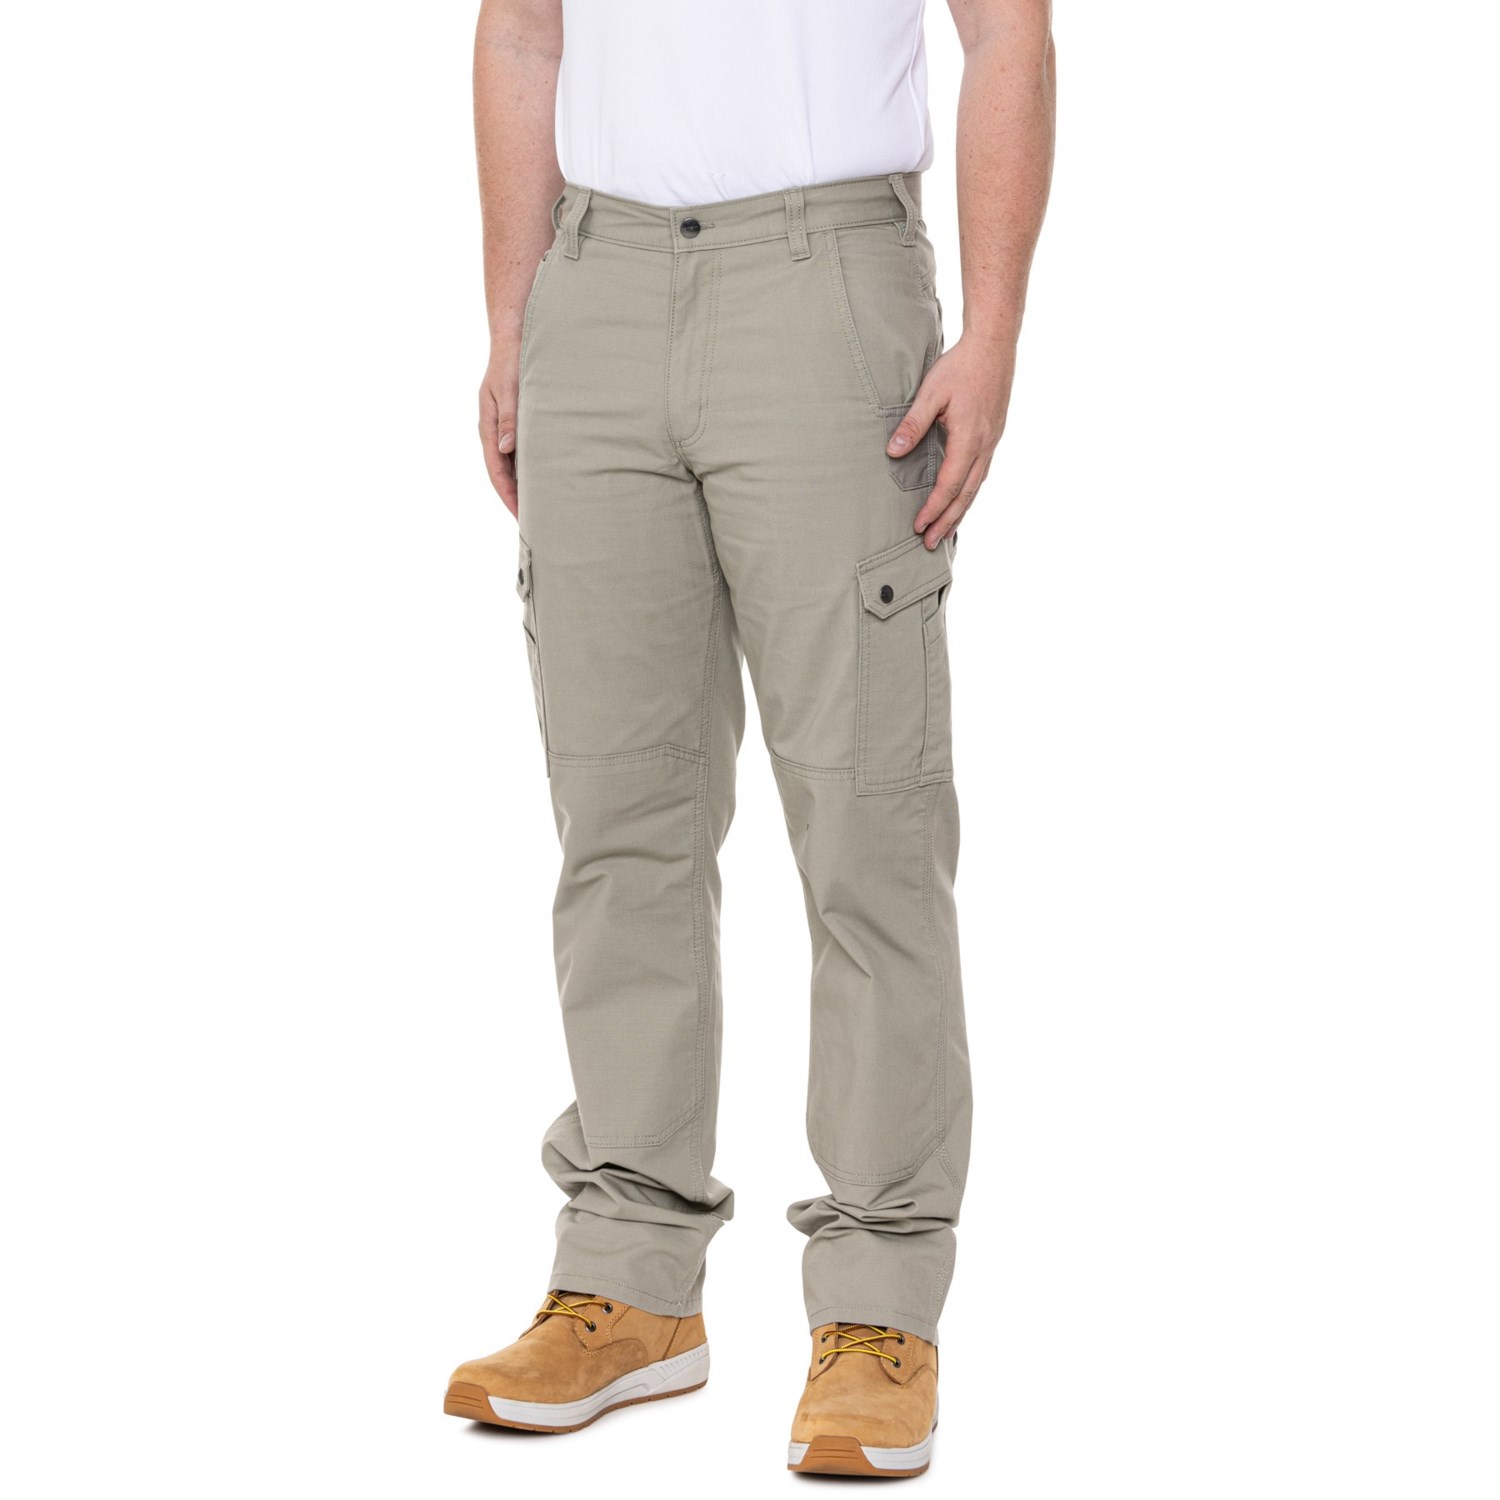 Why You Should Buy Carhartt Cargo Pants for Your Construction Work